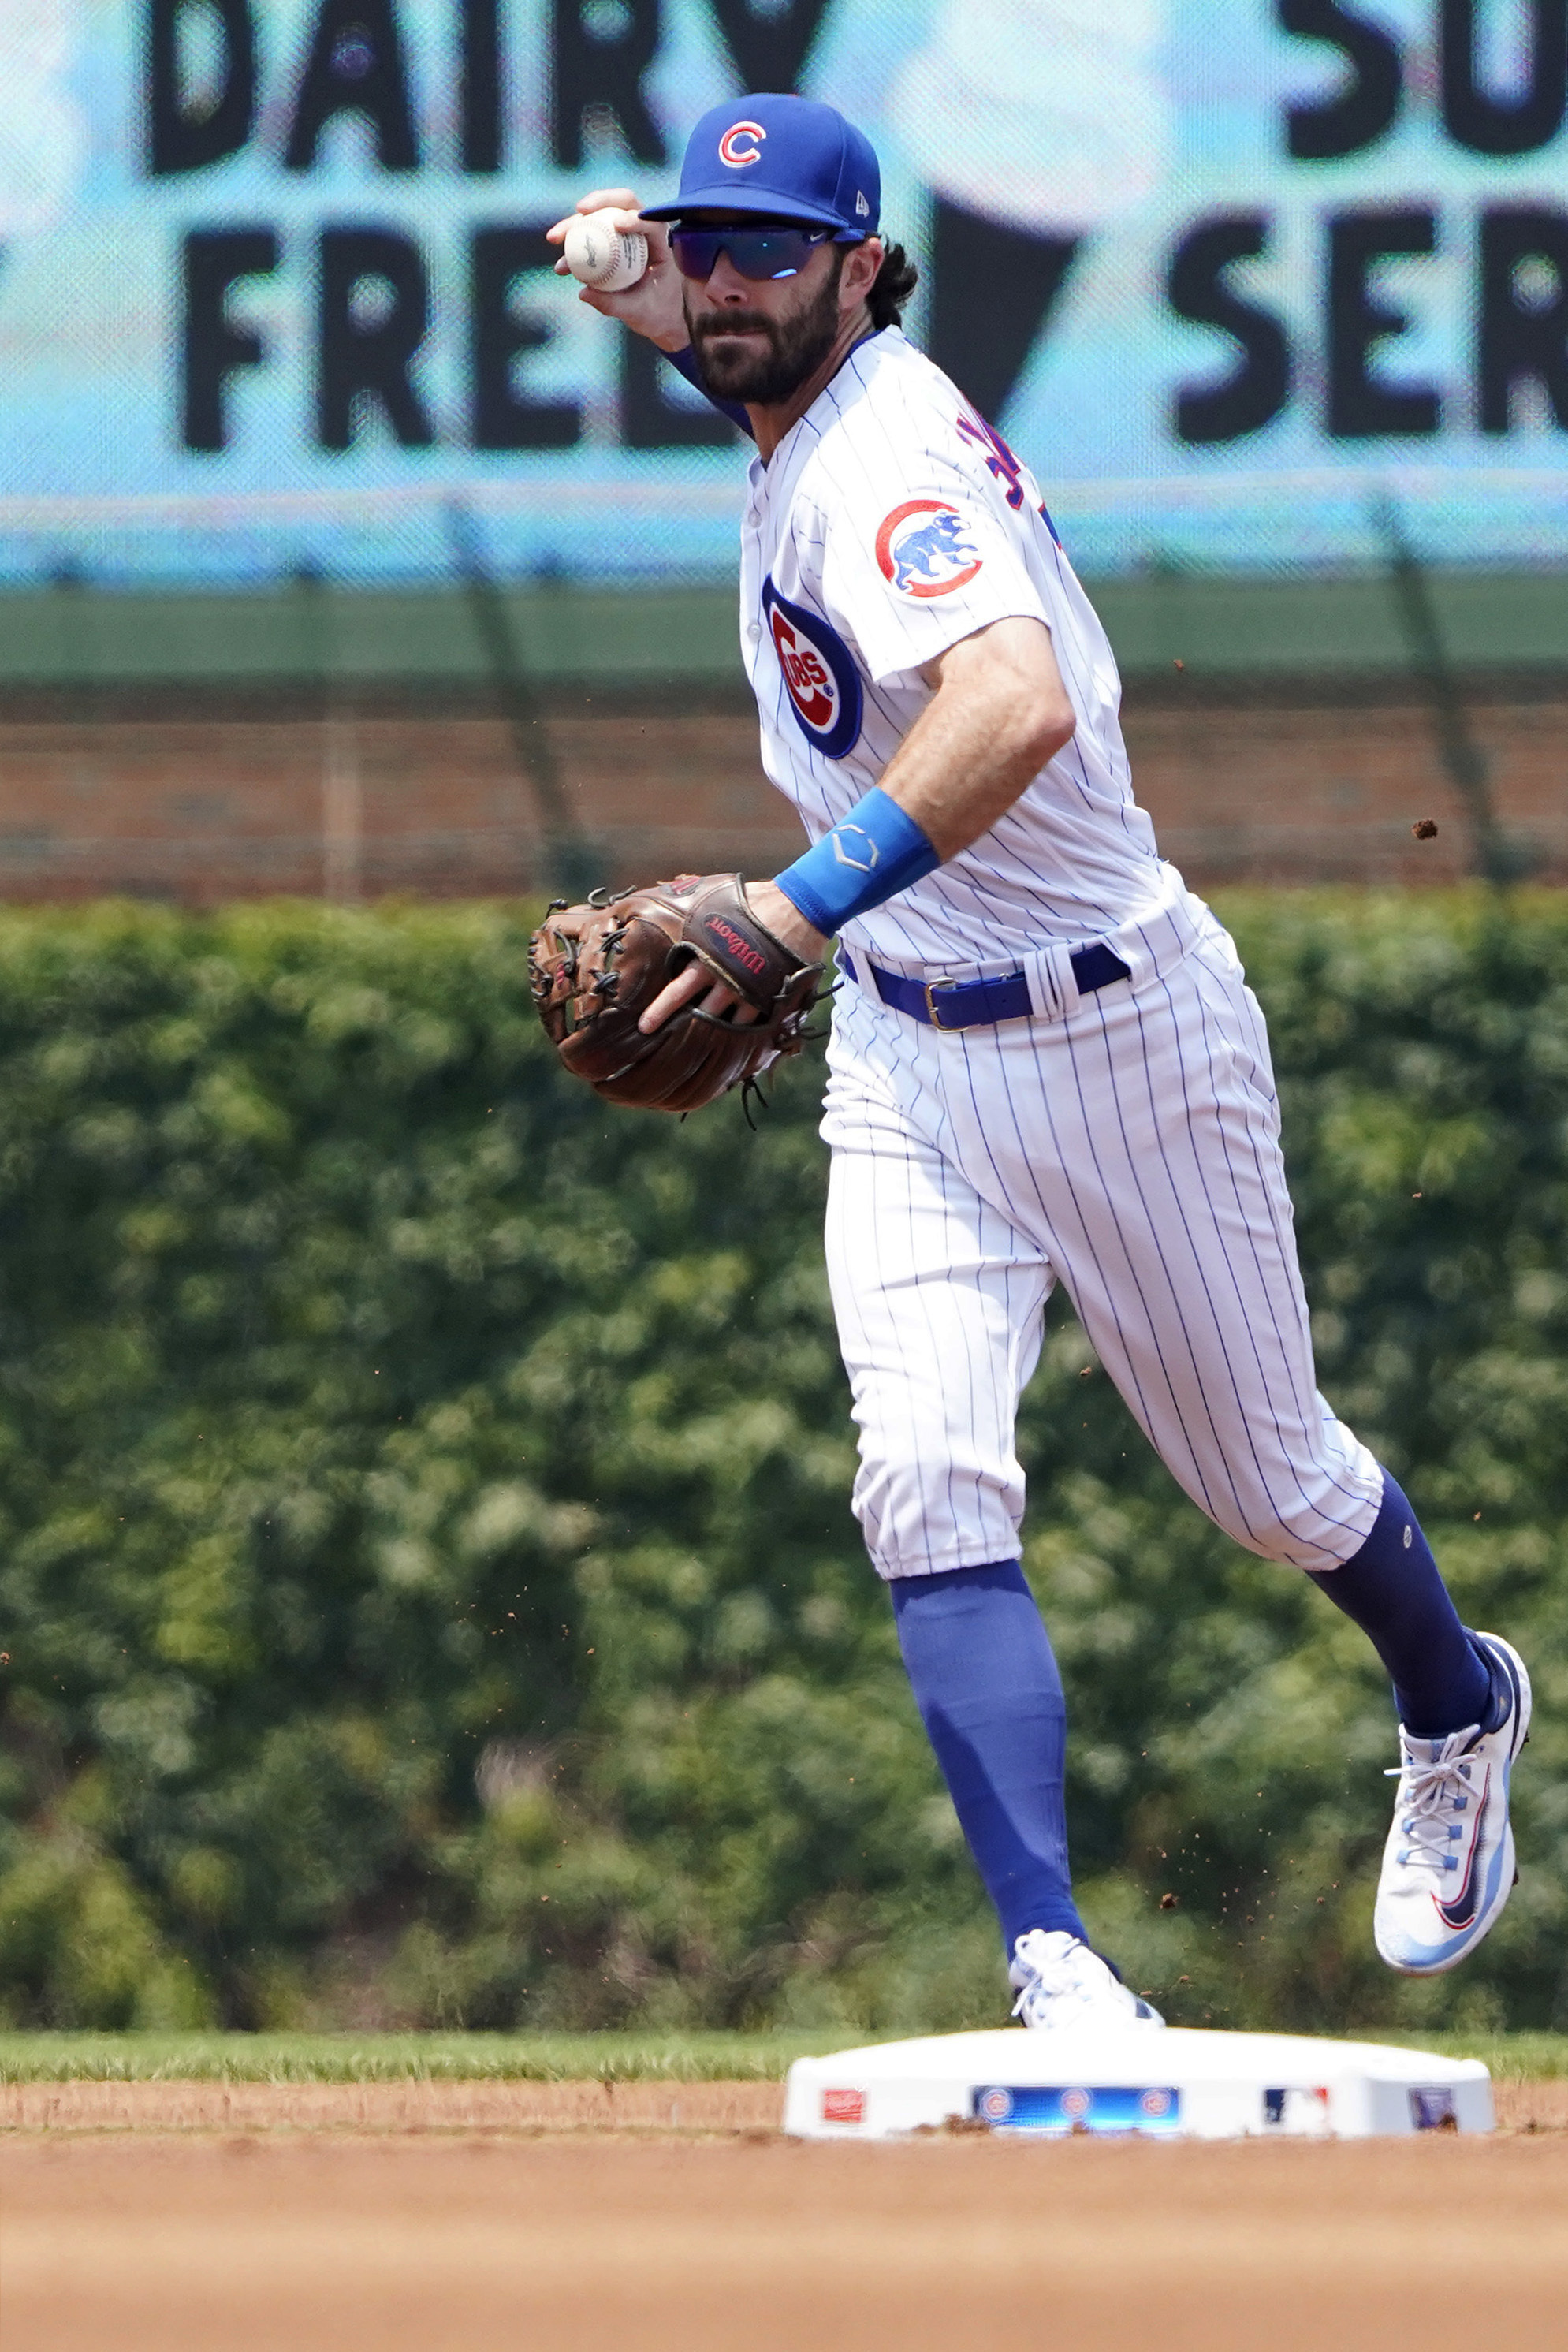 Steele, Hoerner help Chicago Cubs beat Baltimore Orioles 3-2 for